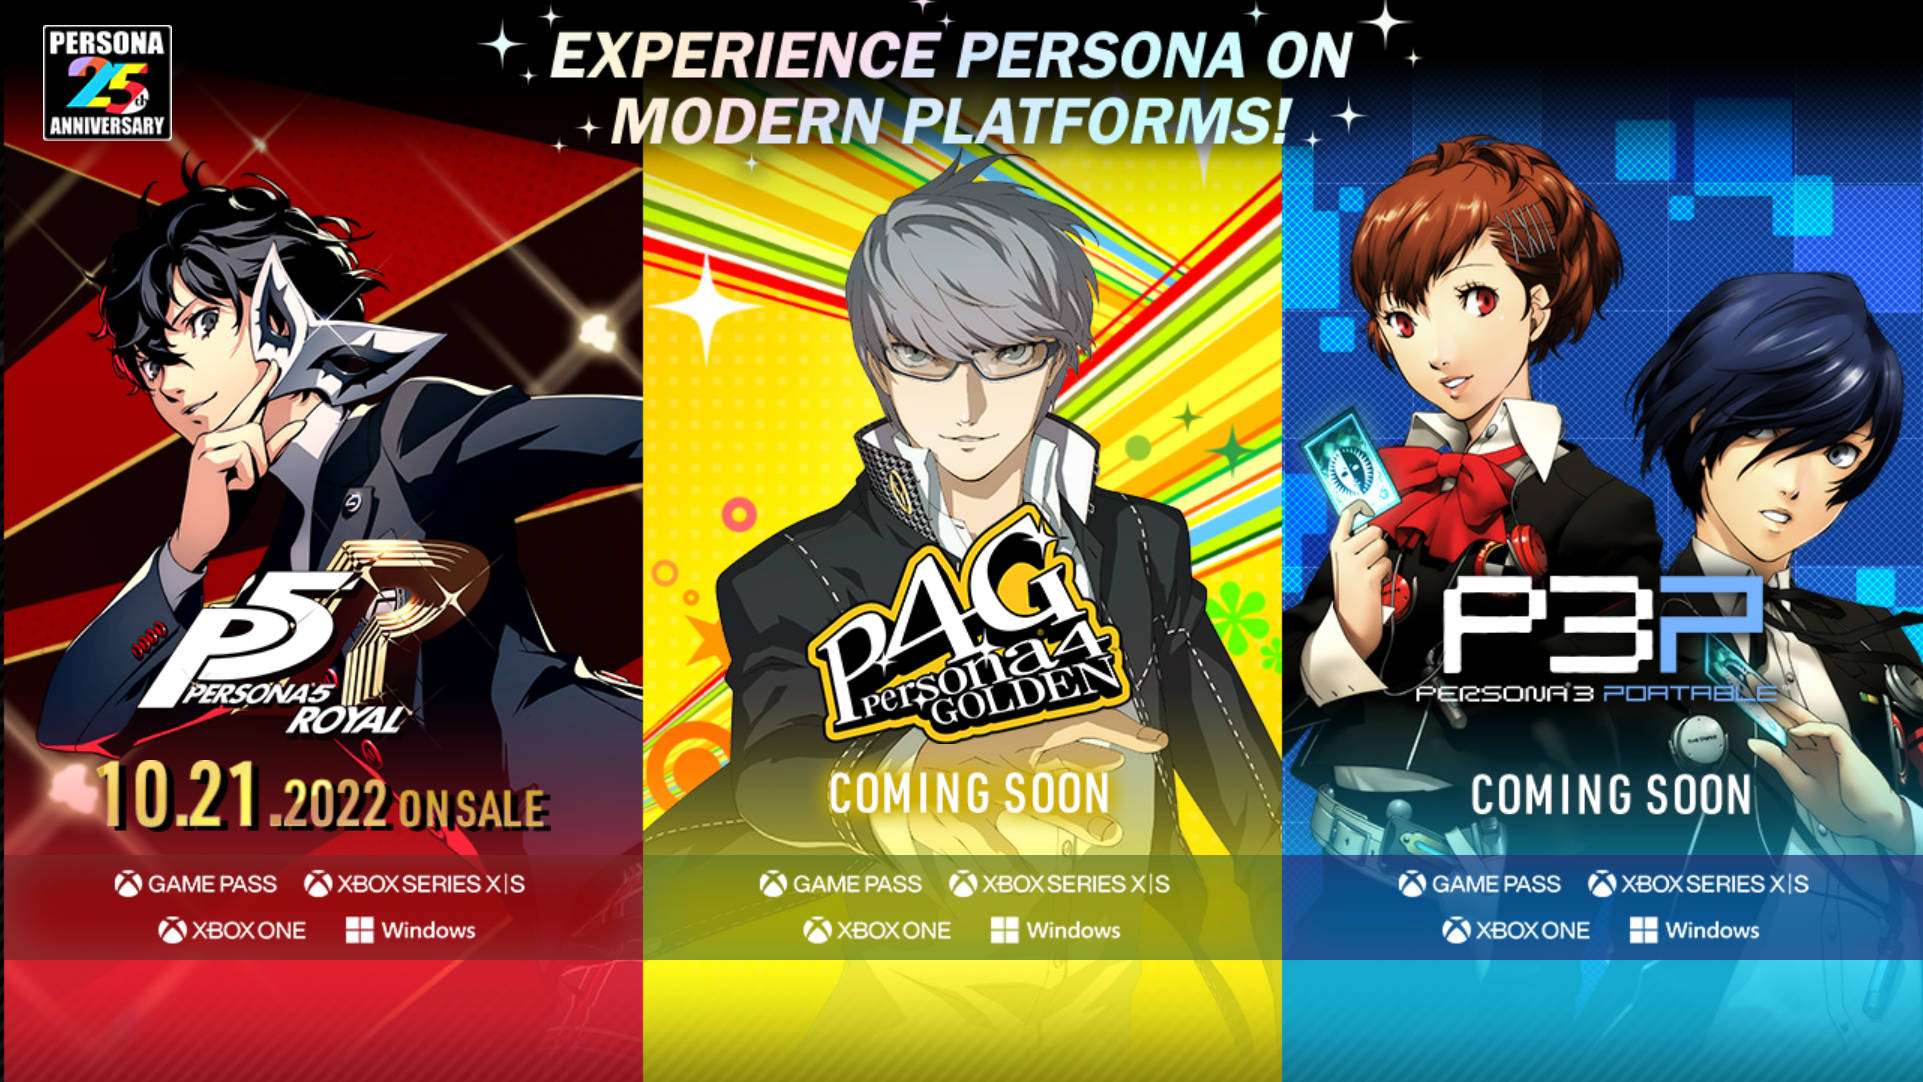 Persona 3 Portable Now Available On Xbox Game Pass